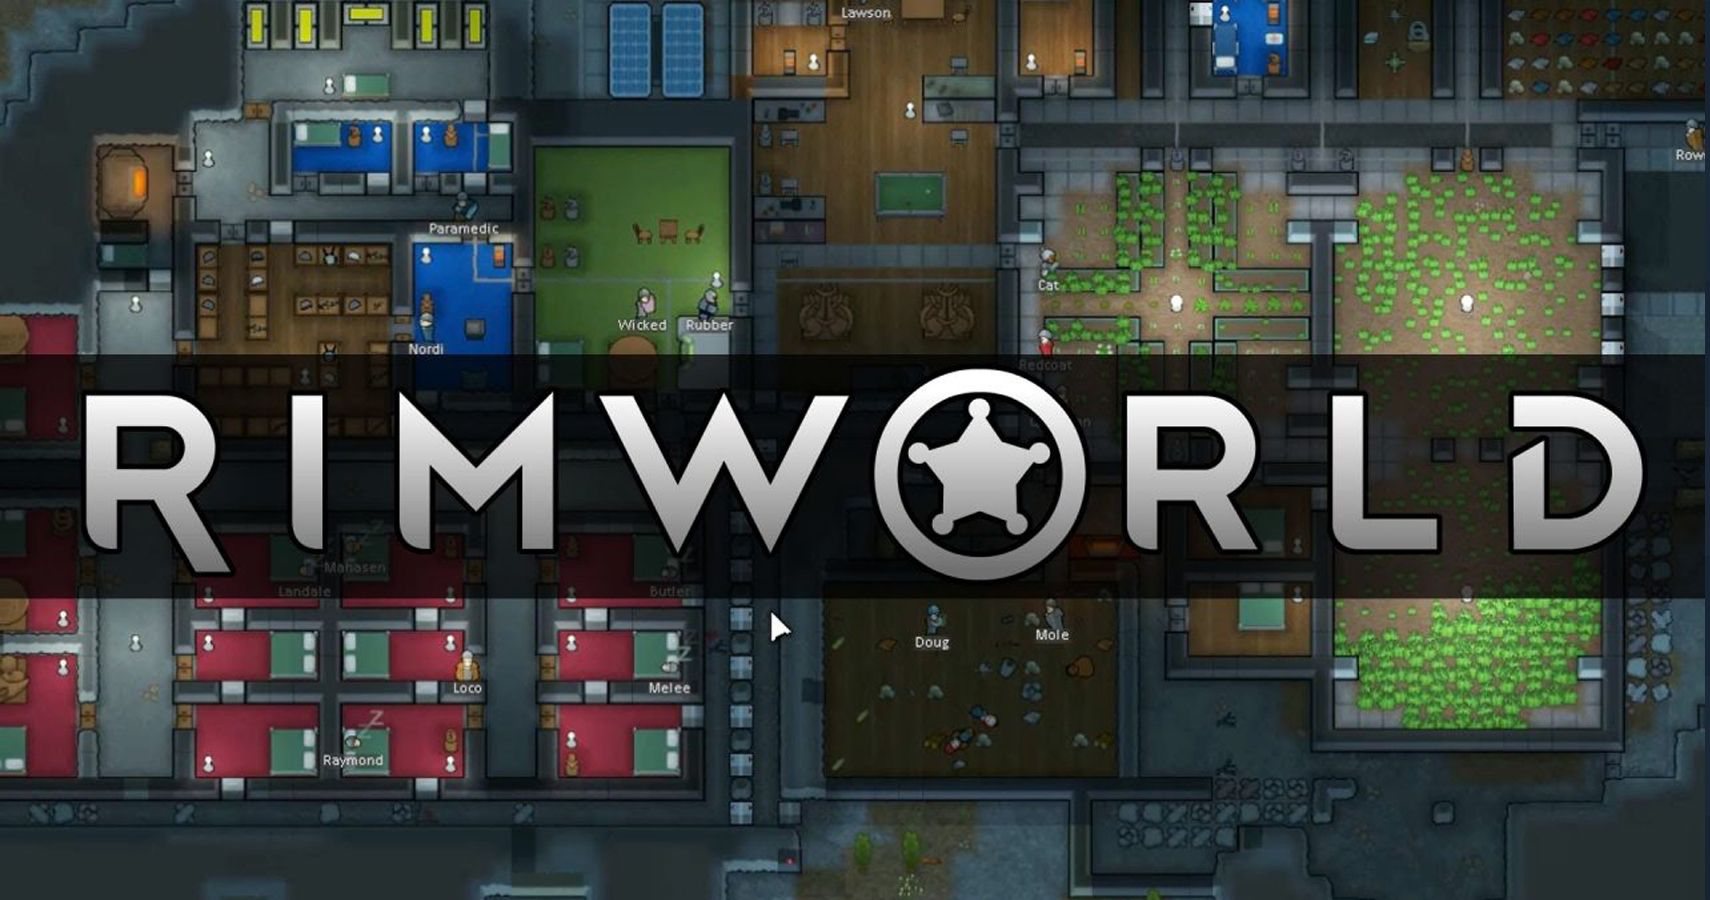 RimWorld Was The #1 PlayerReviewed Game On Steam Of 2018  Ahead Of Celeste And Obra Dinn